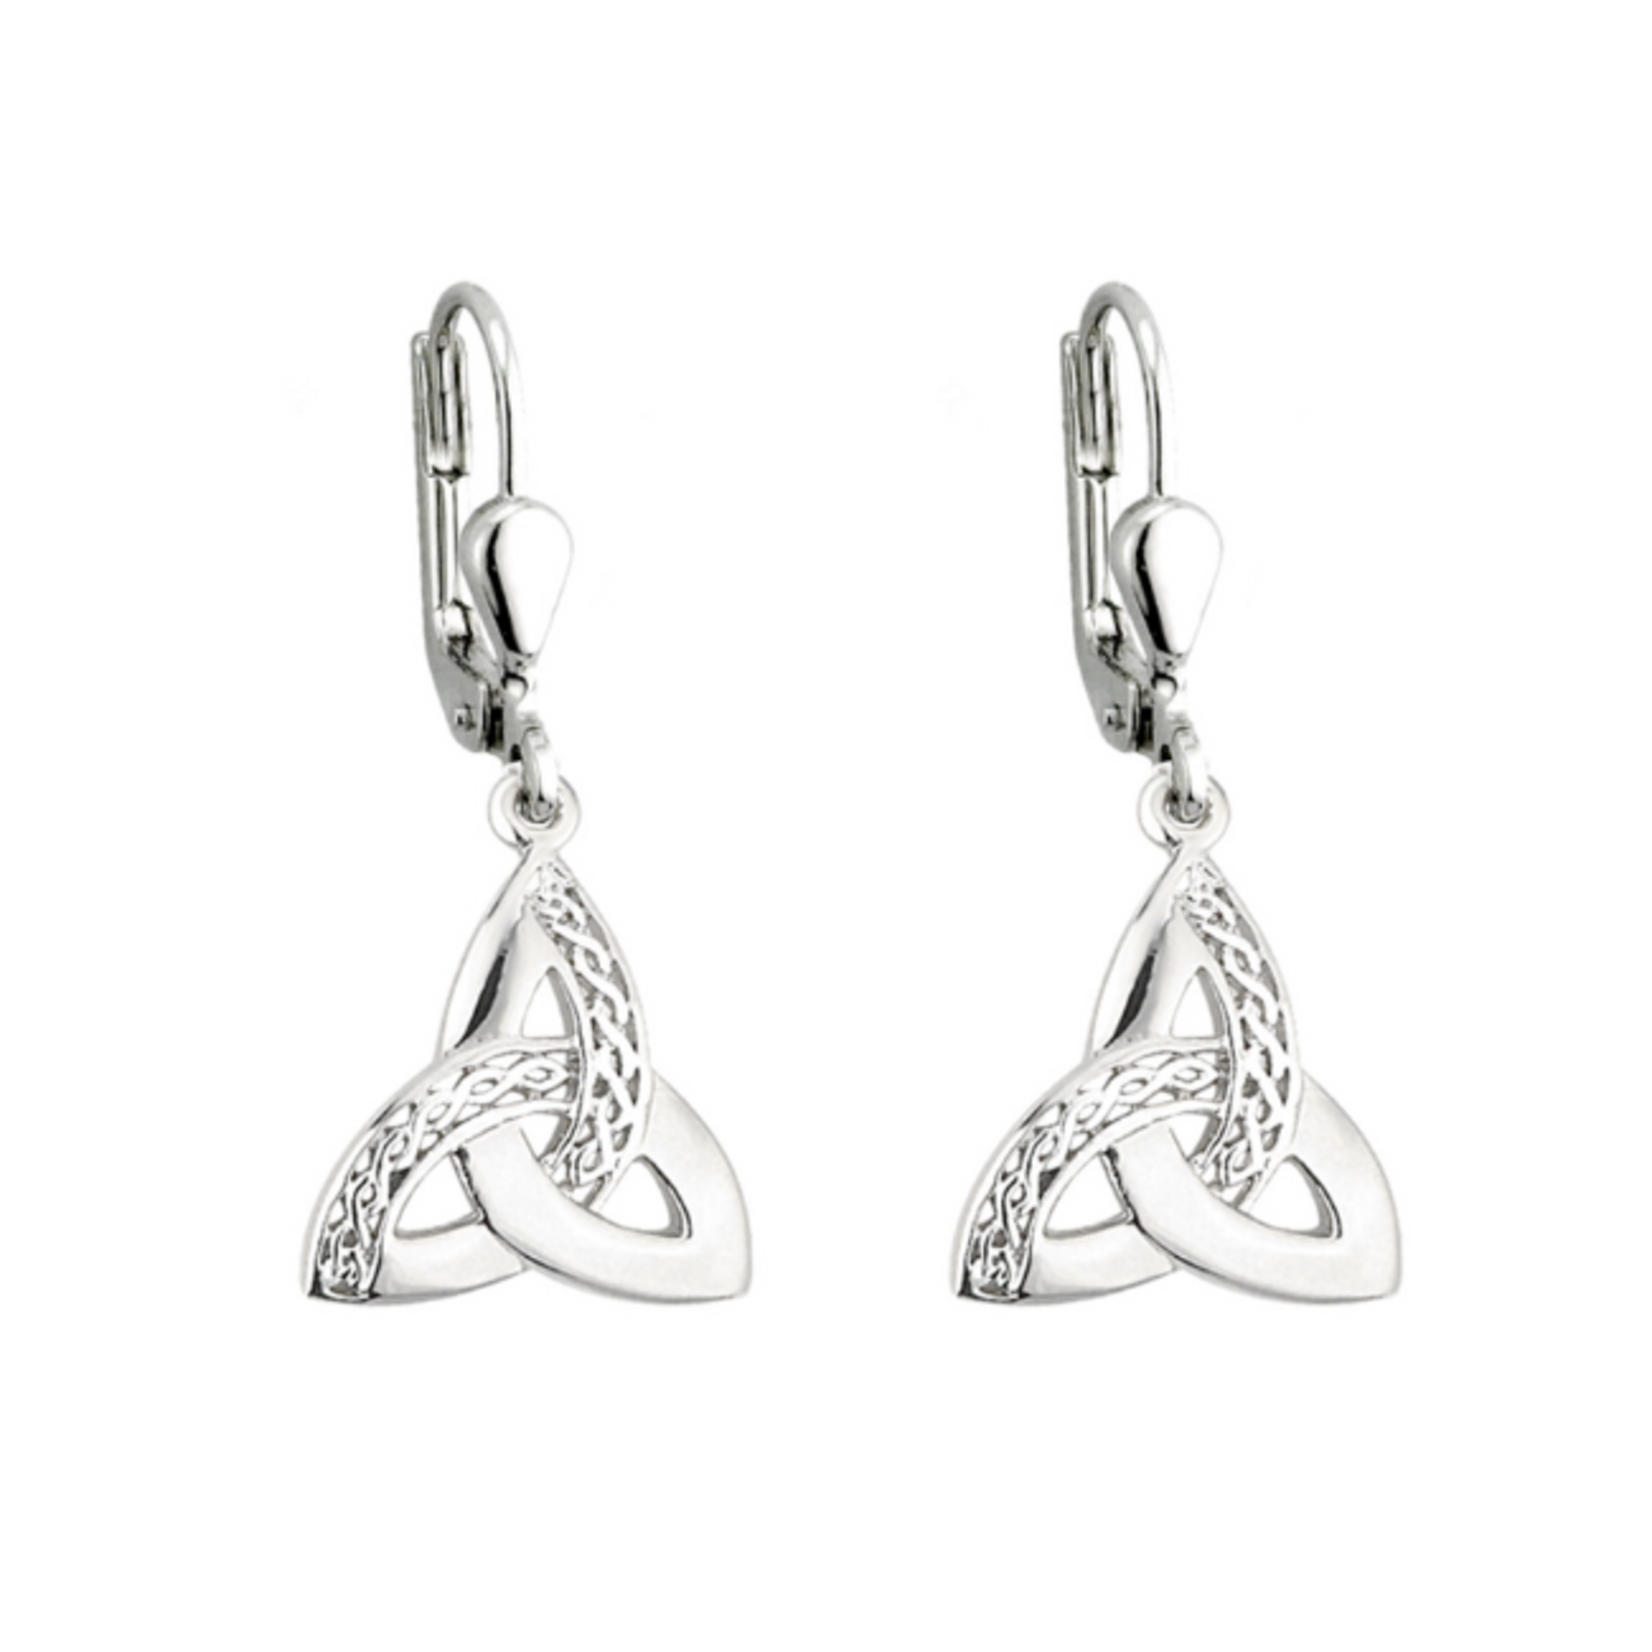 Solvar S/S Etched Trinity Knot Drop Earrings